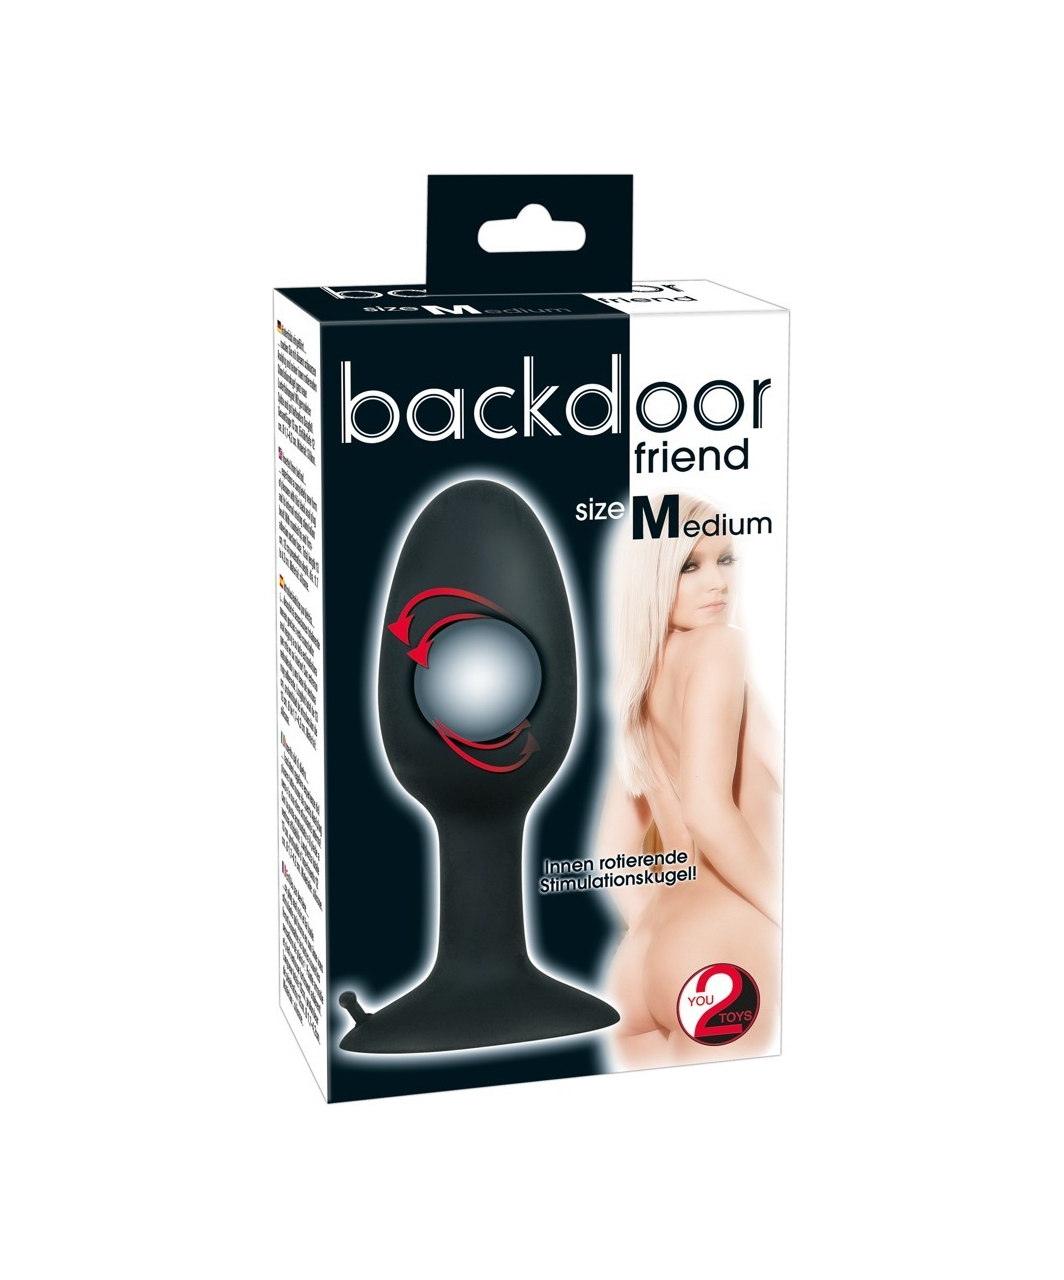 You2Toys Backdoor Friend Jiggle Suction Cup Plug